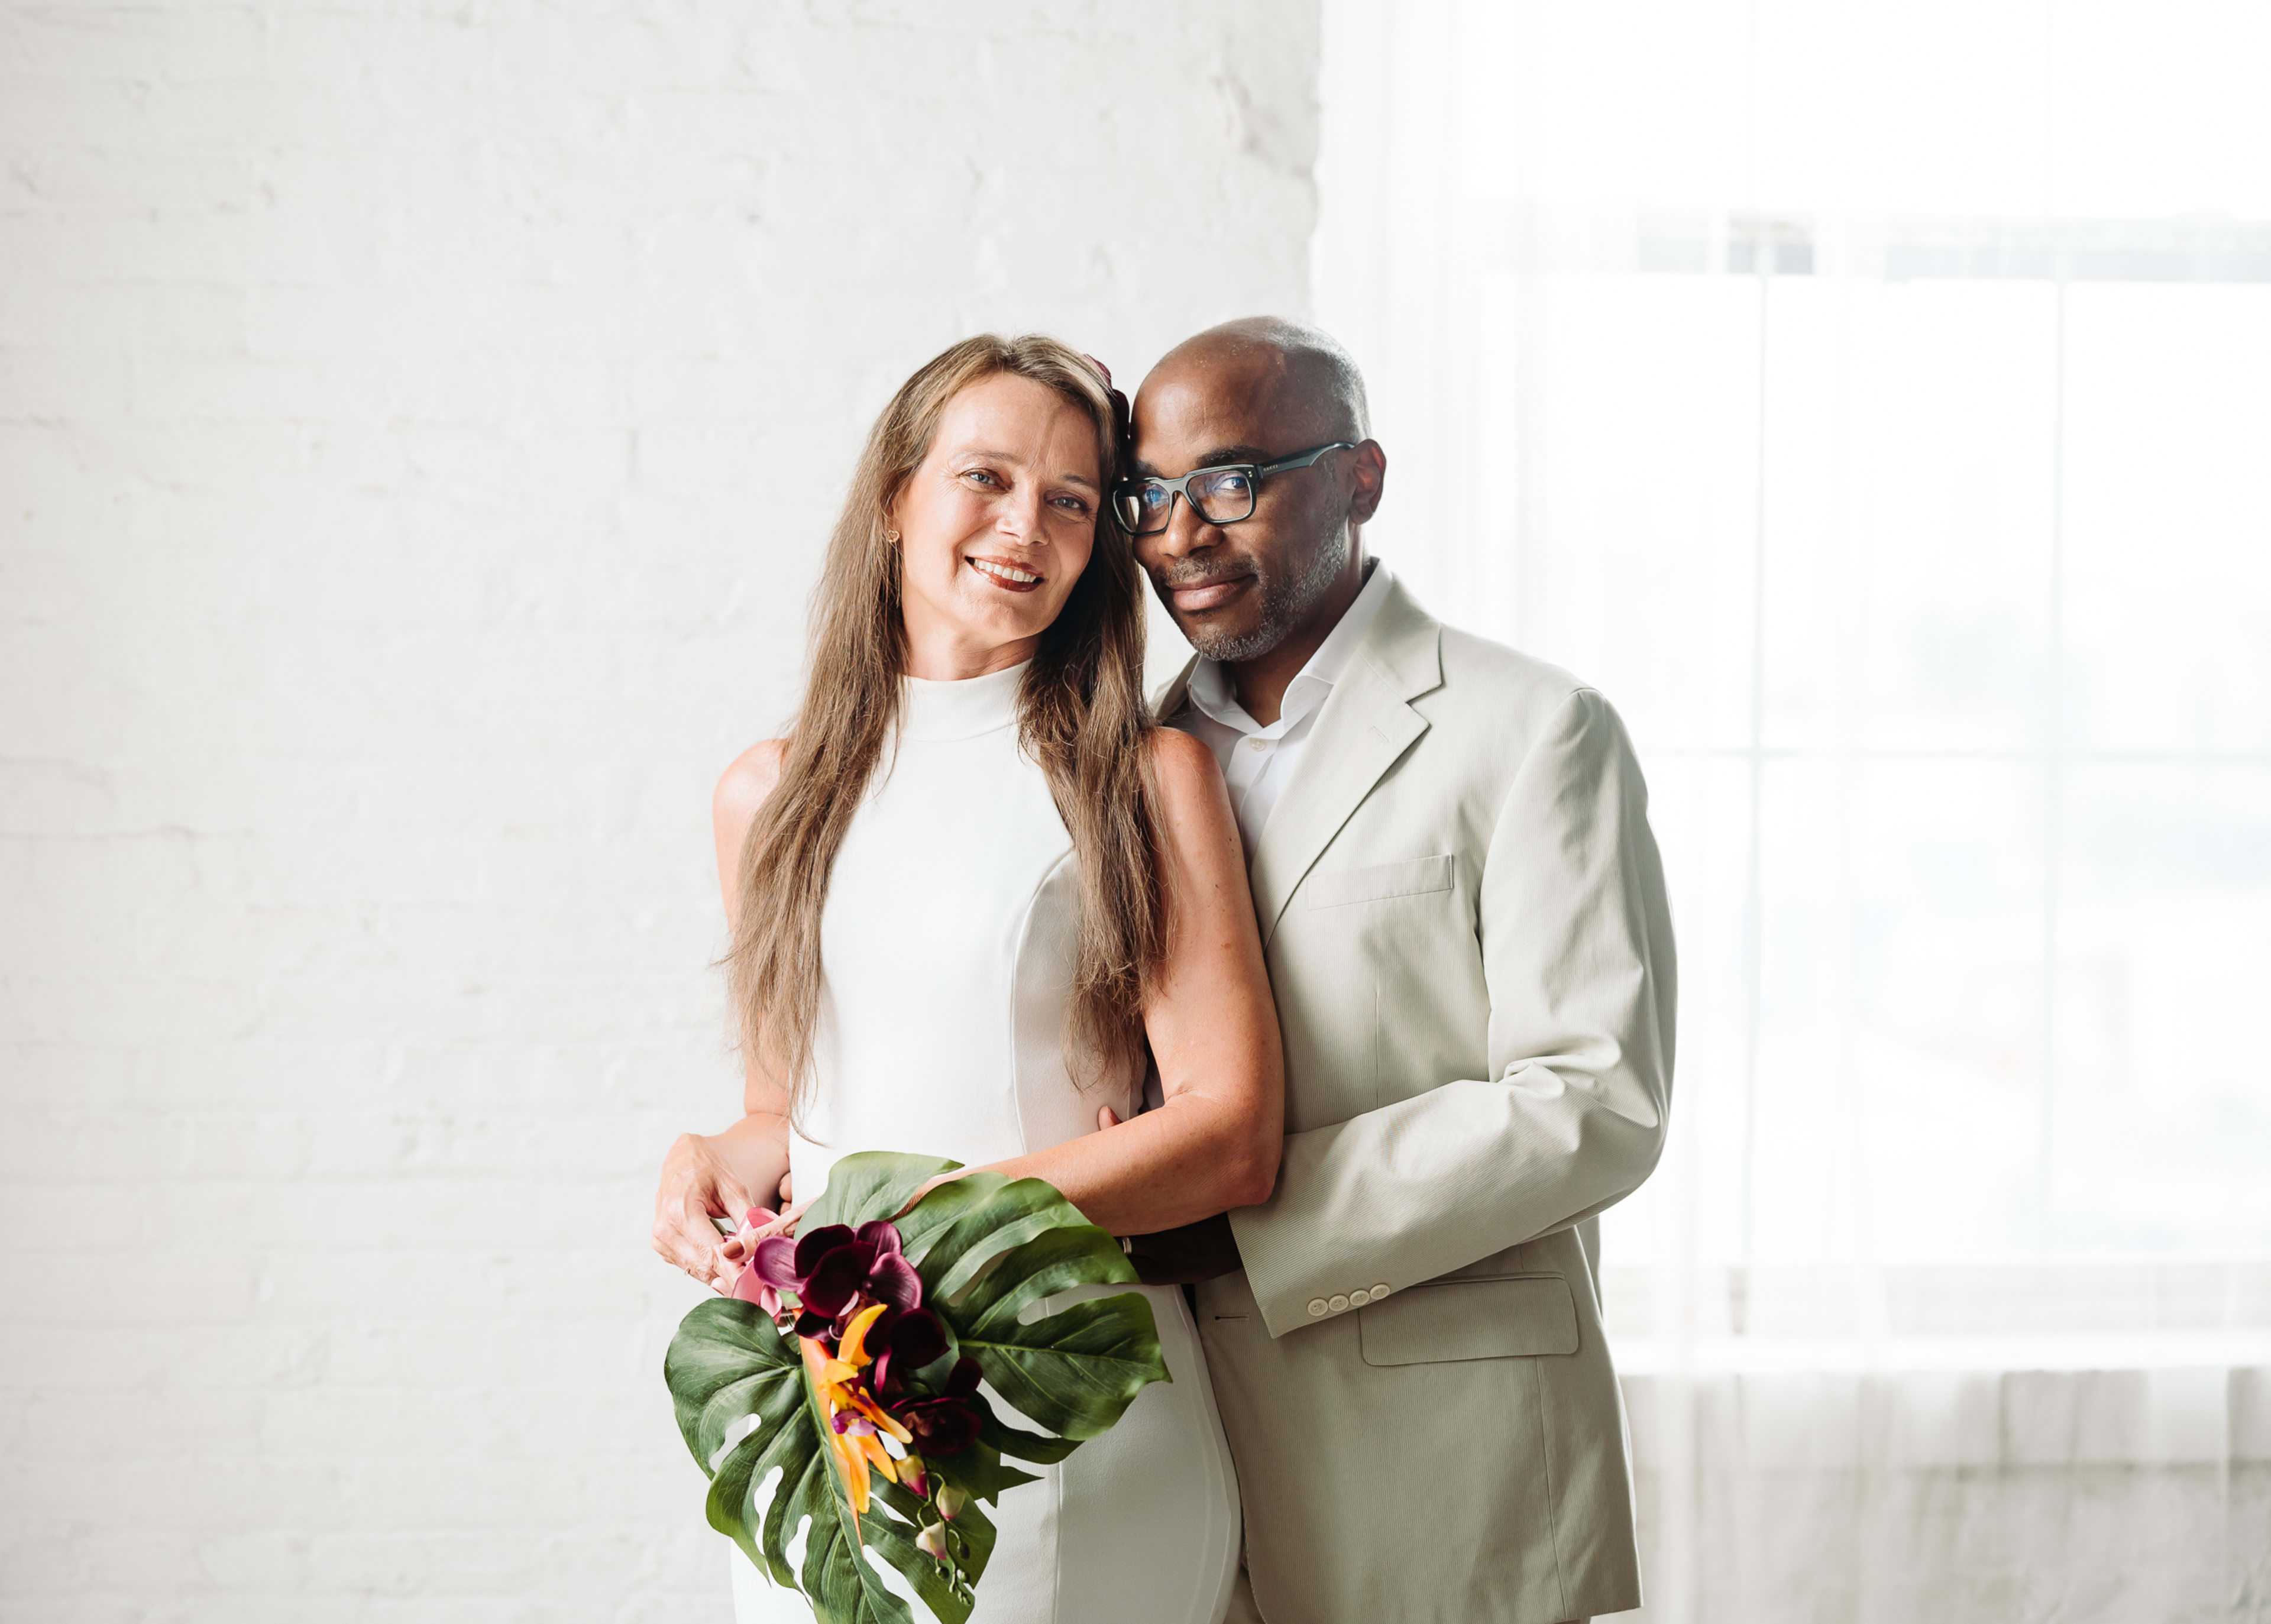 A couple posing in a minimalistic white and beige photoshoot holding plants.